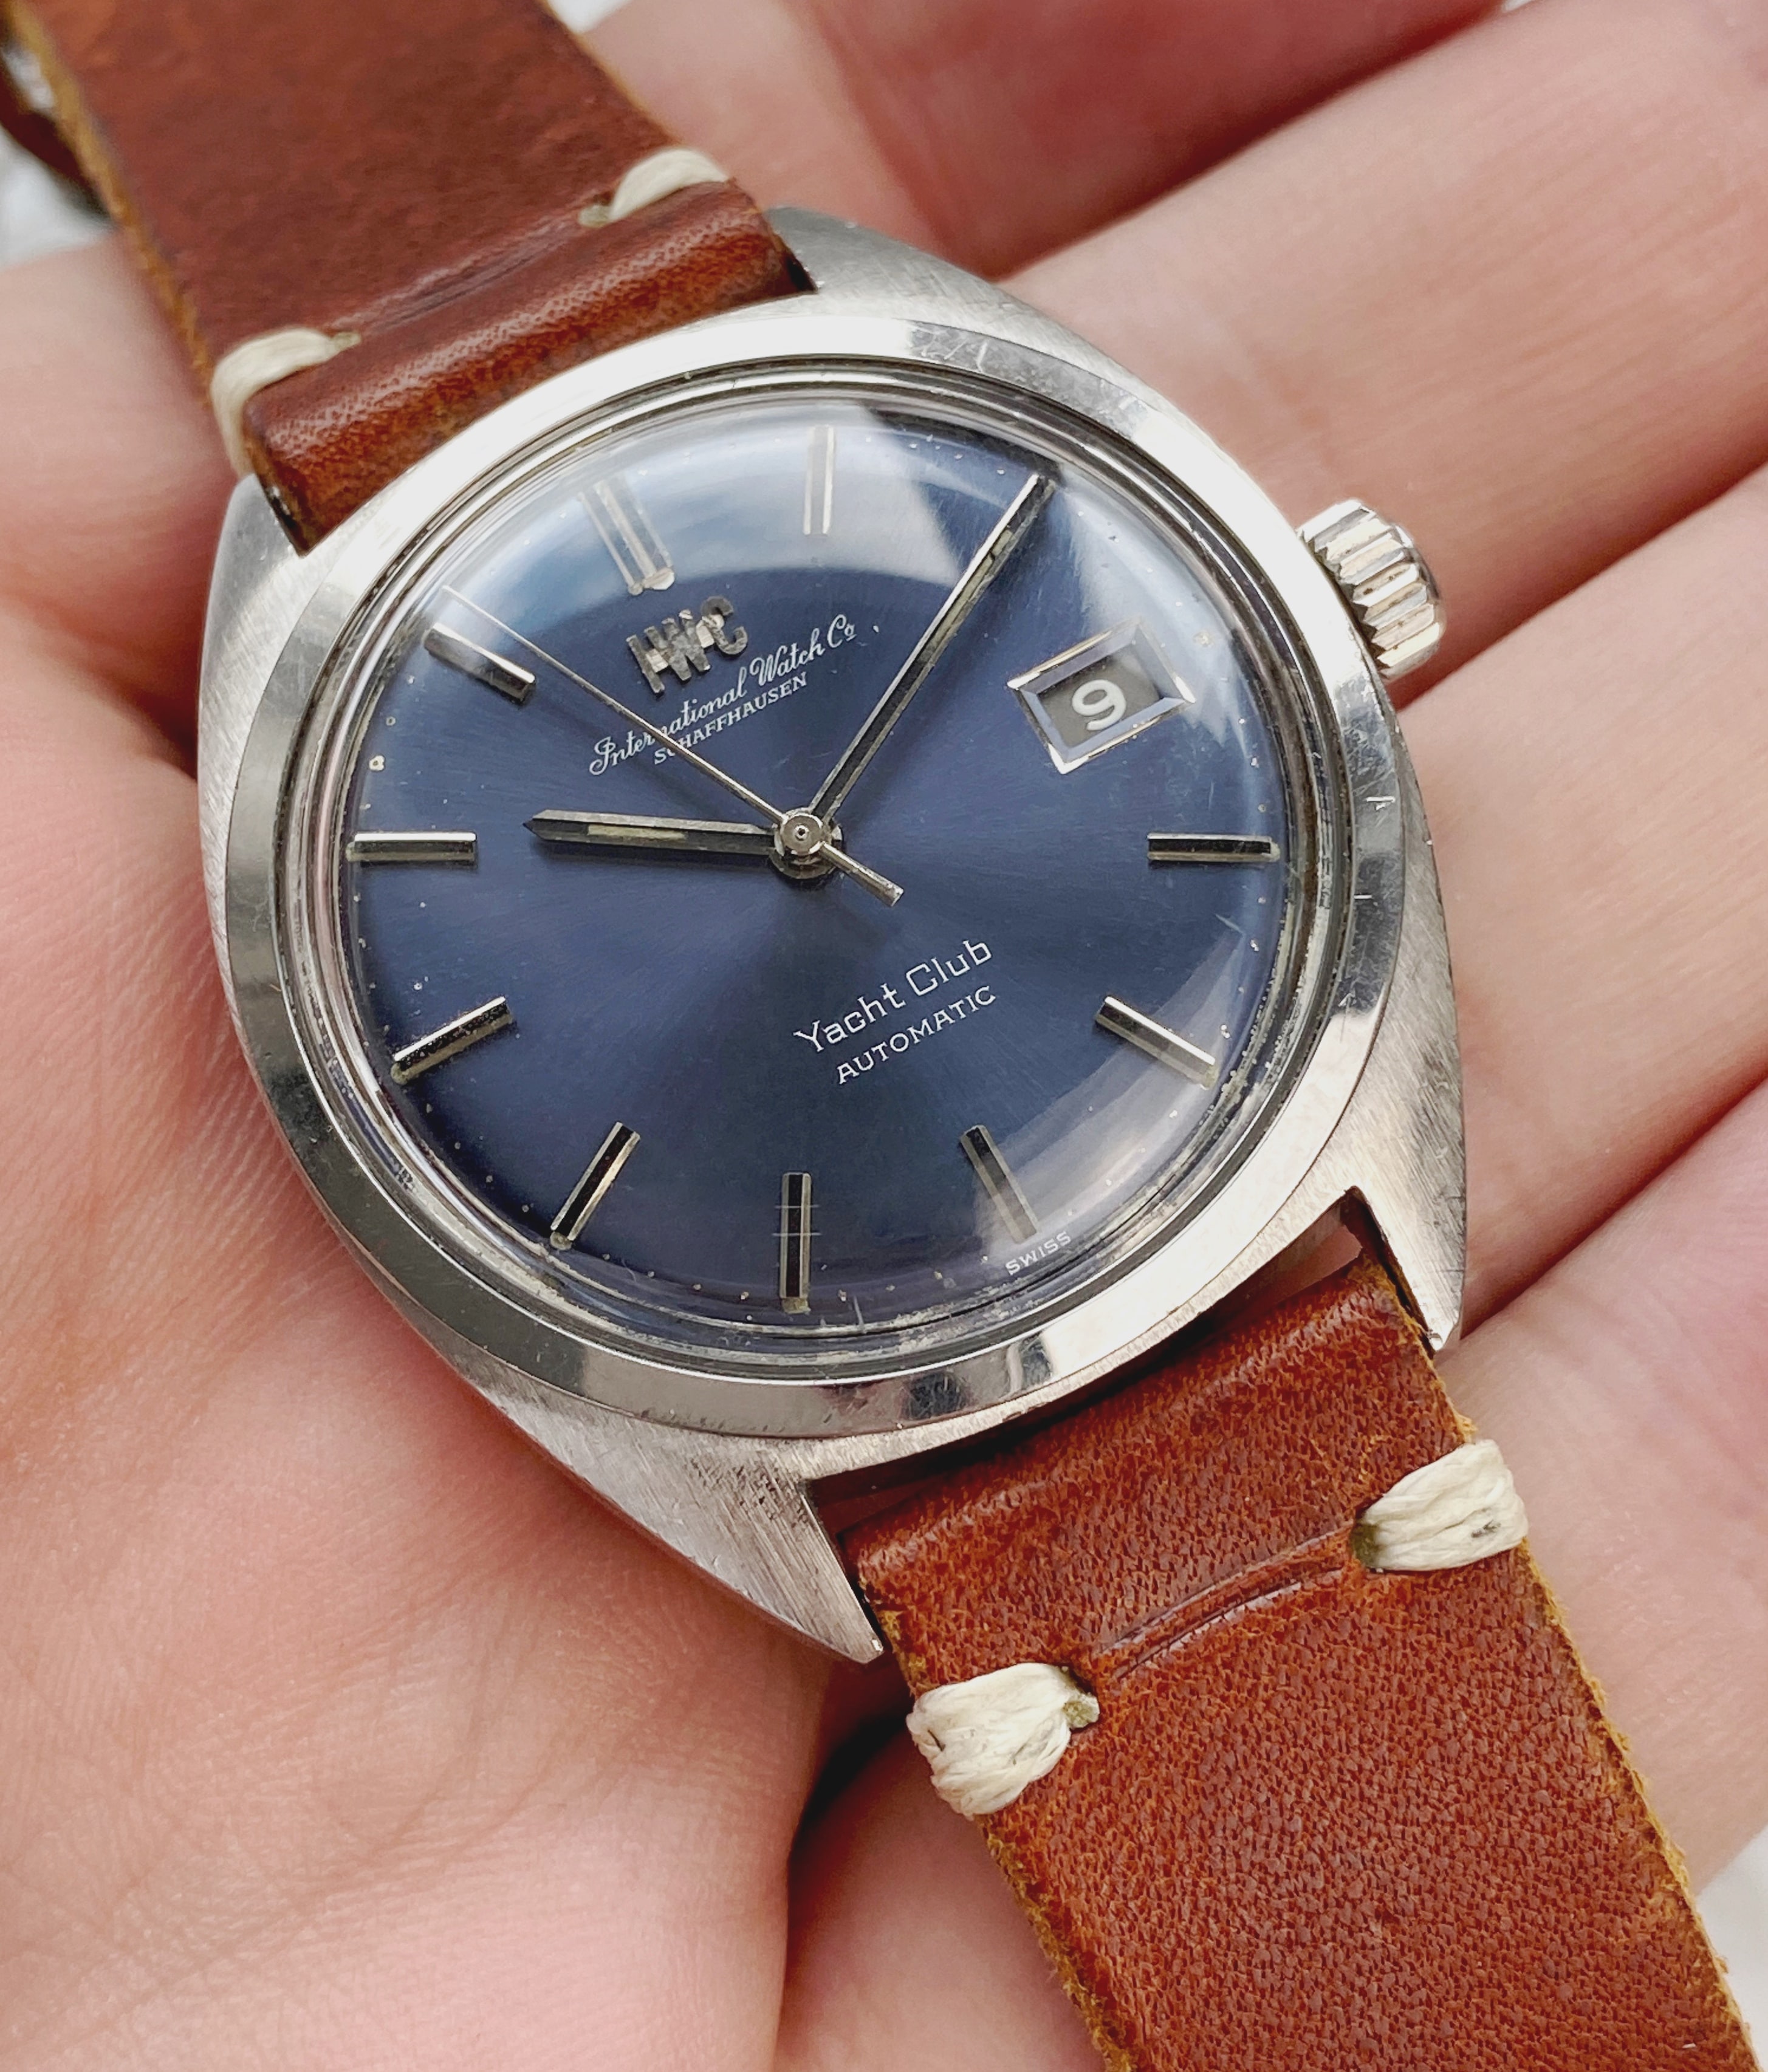 iwc yacht club vintage review